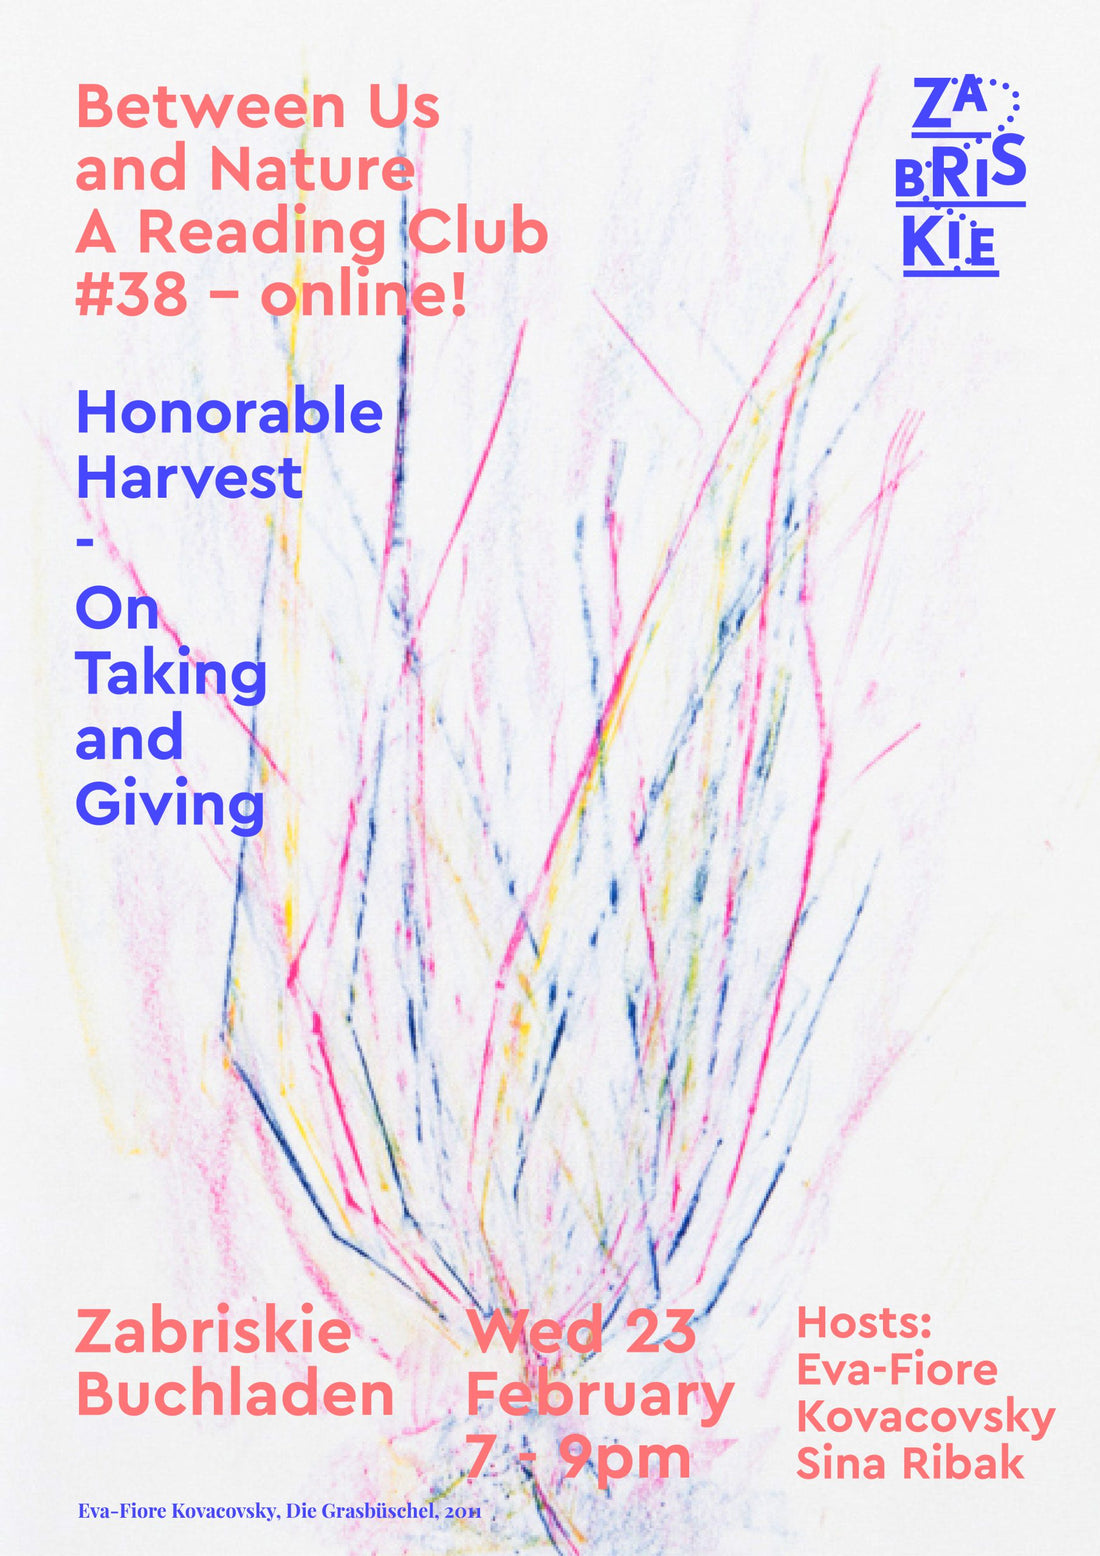 Between Us and Nature – A Reading Club #38 – online! - Honorable Harvest - On Taking and Giving